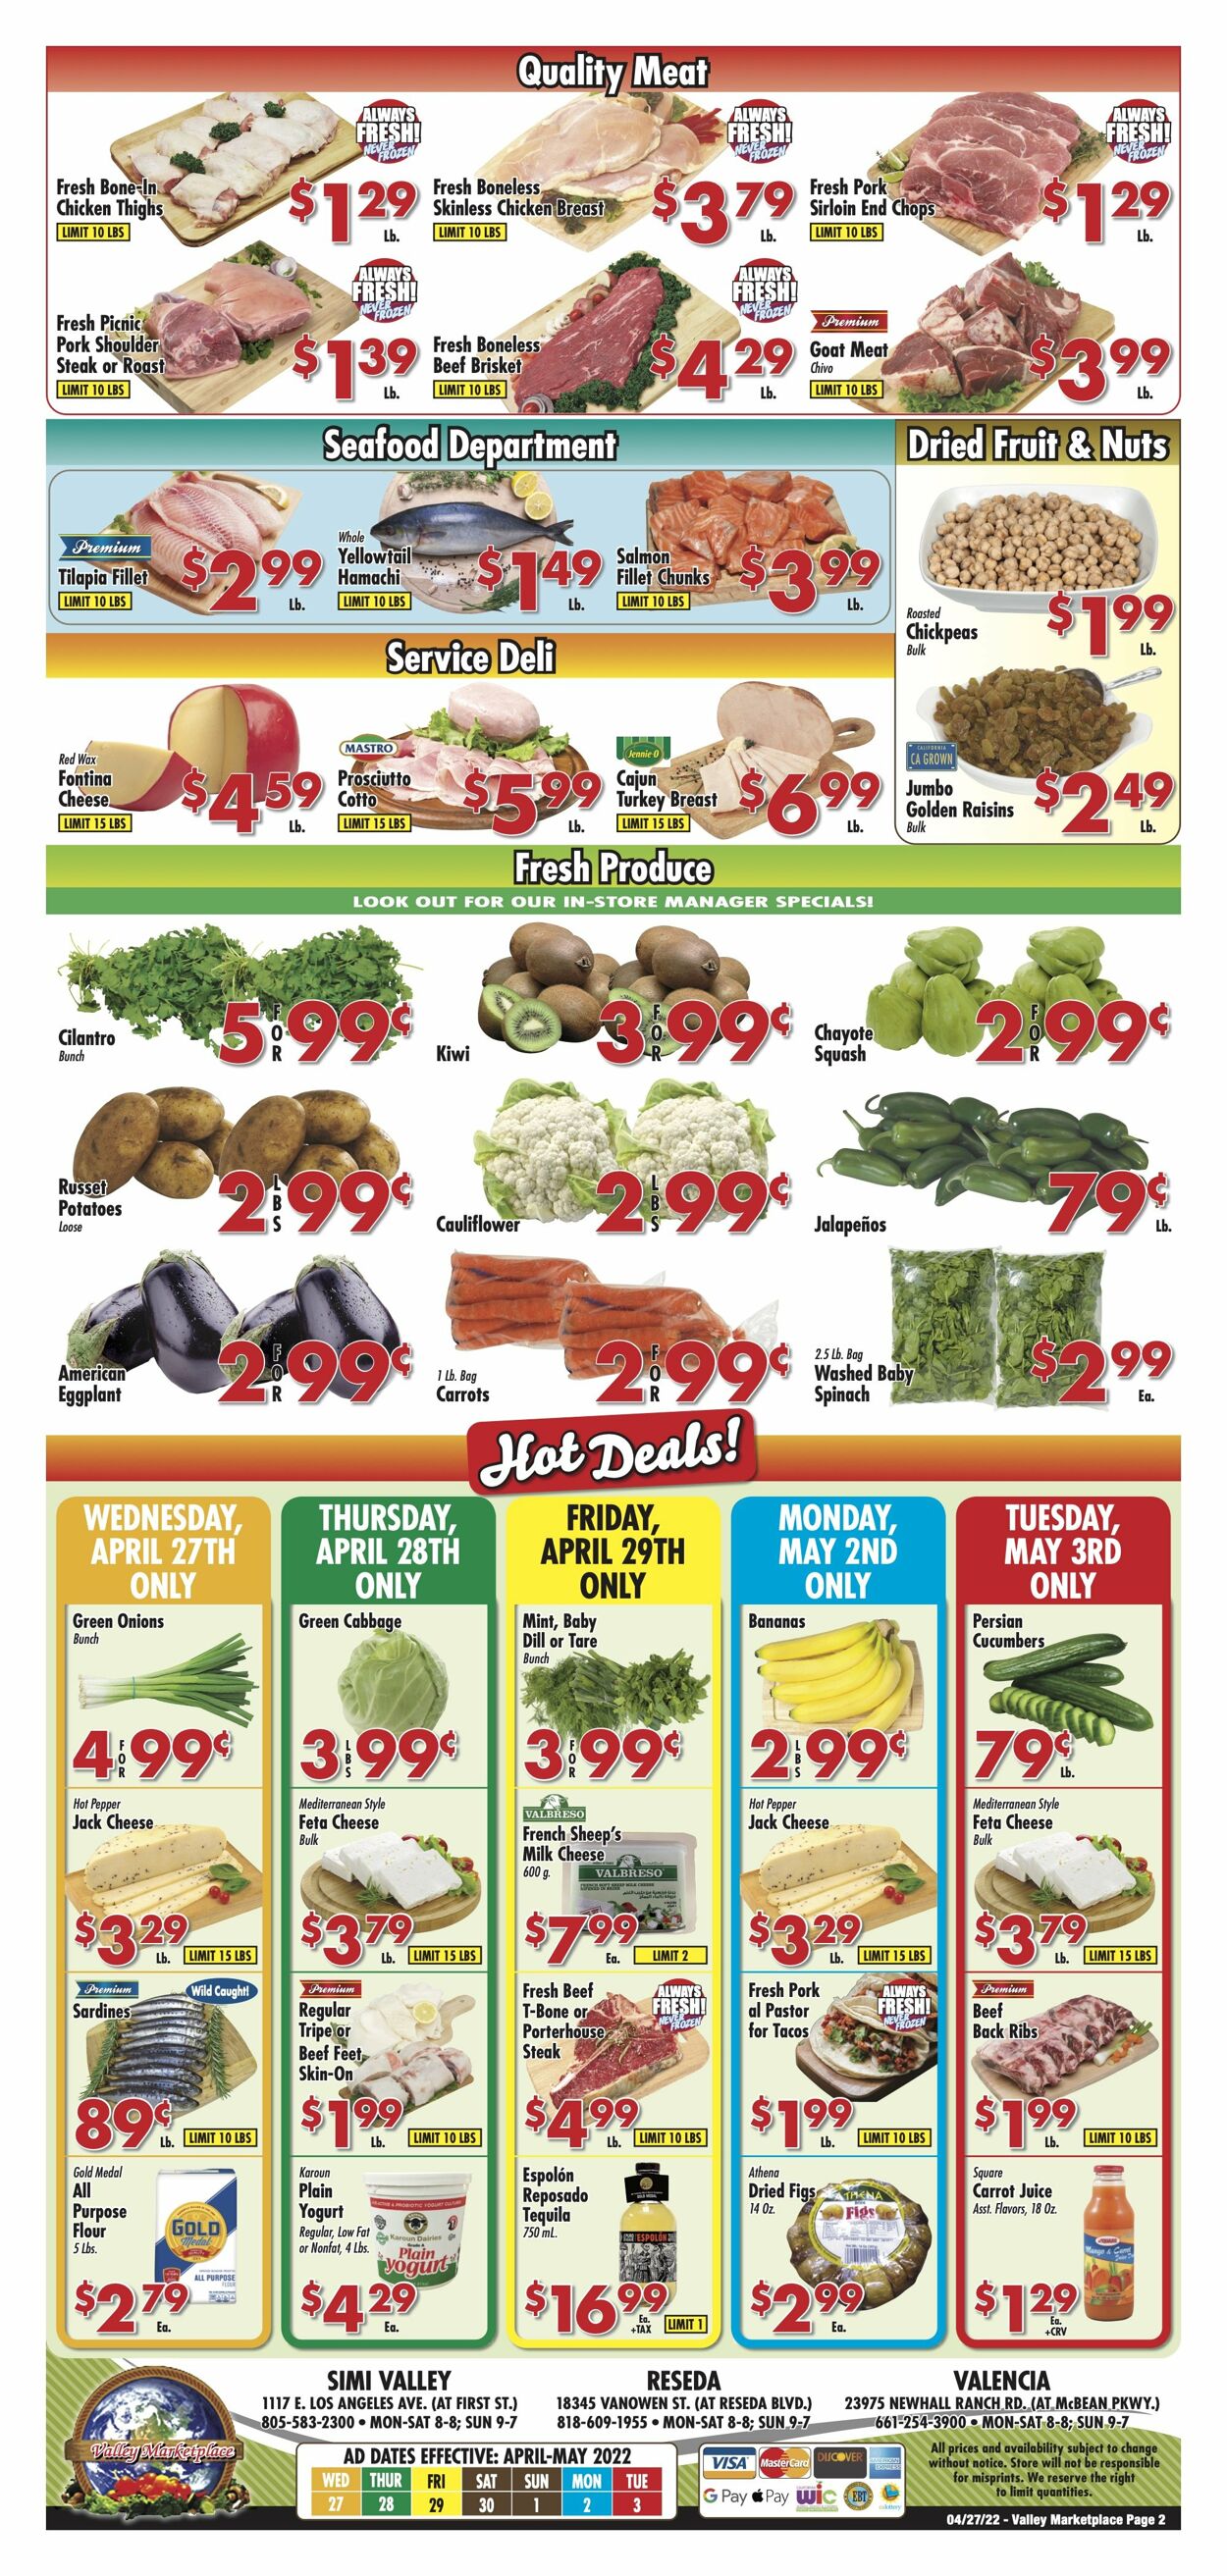 Weekly ad Valley Marketplace 04/27/2022 - 05/03/2022